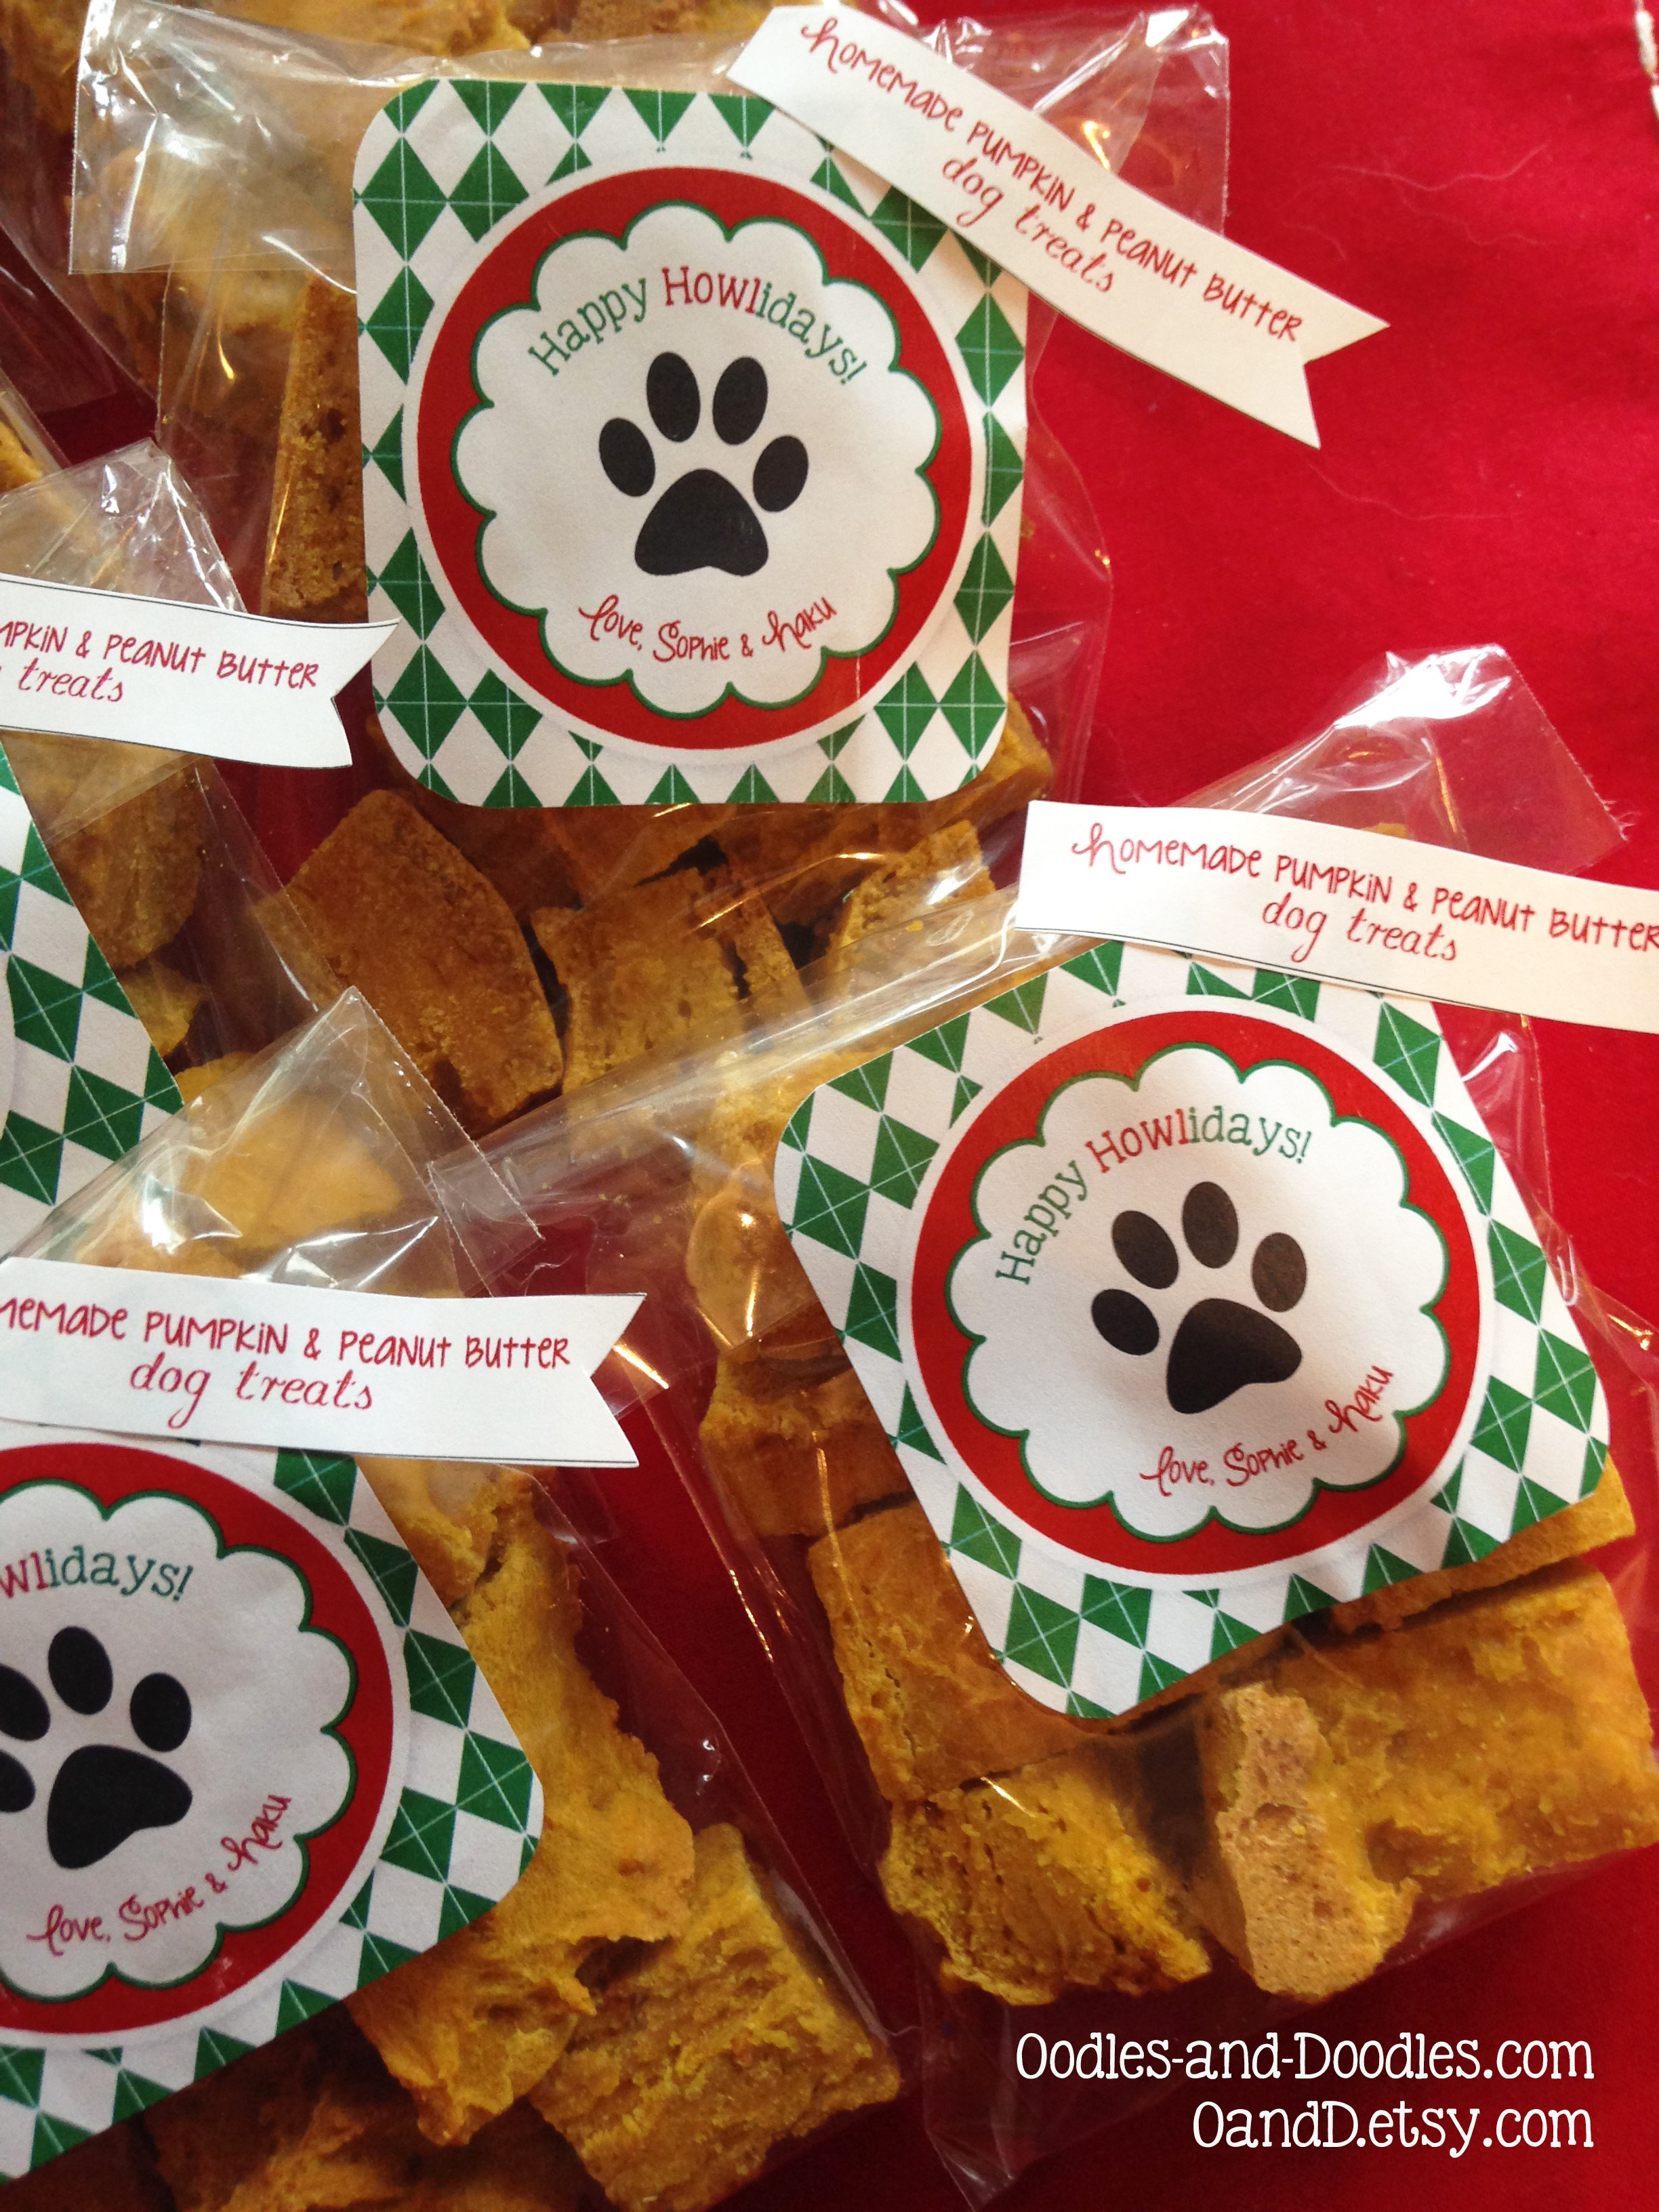 Free Printables  Oodles And Doodles Oandd throughout Dog Treat Label Template